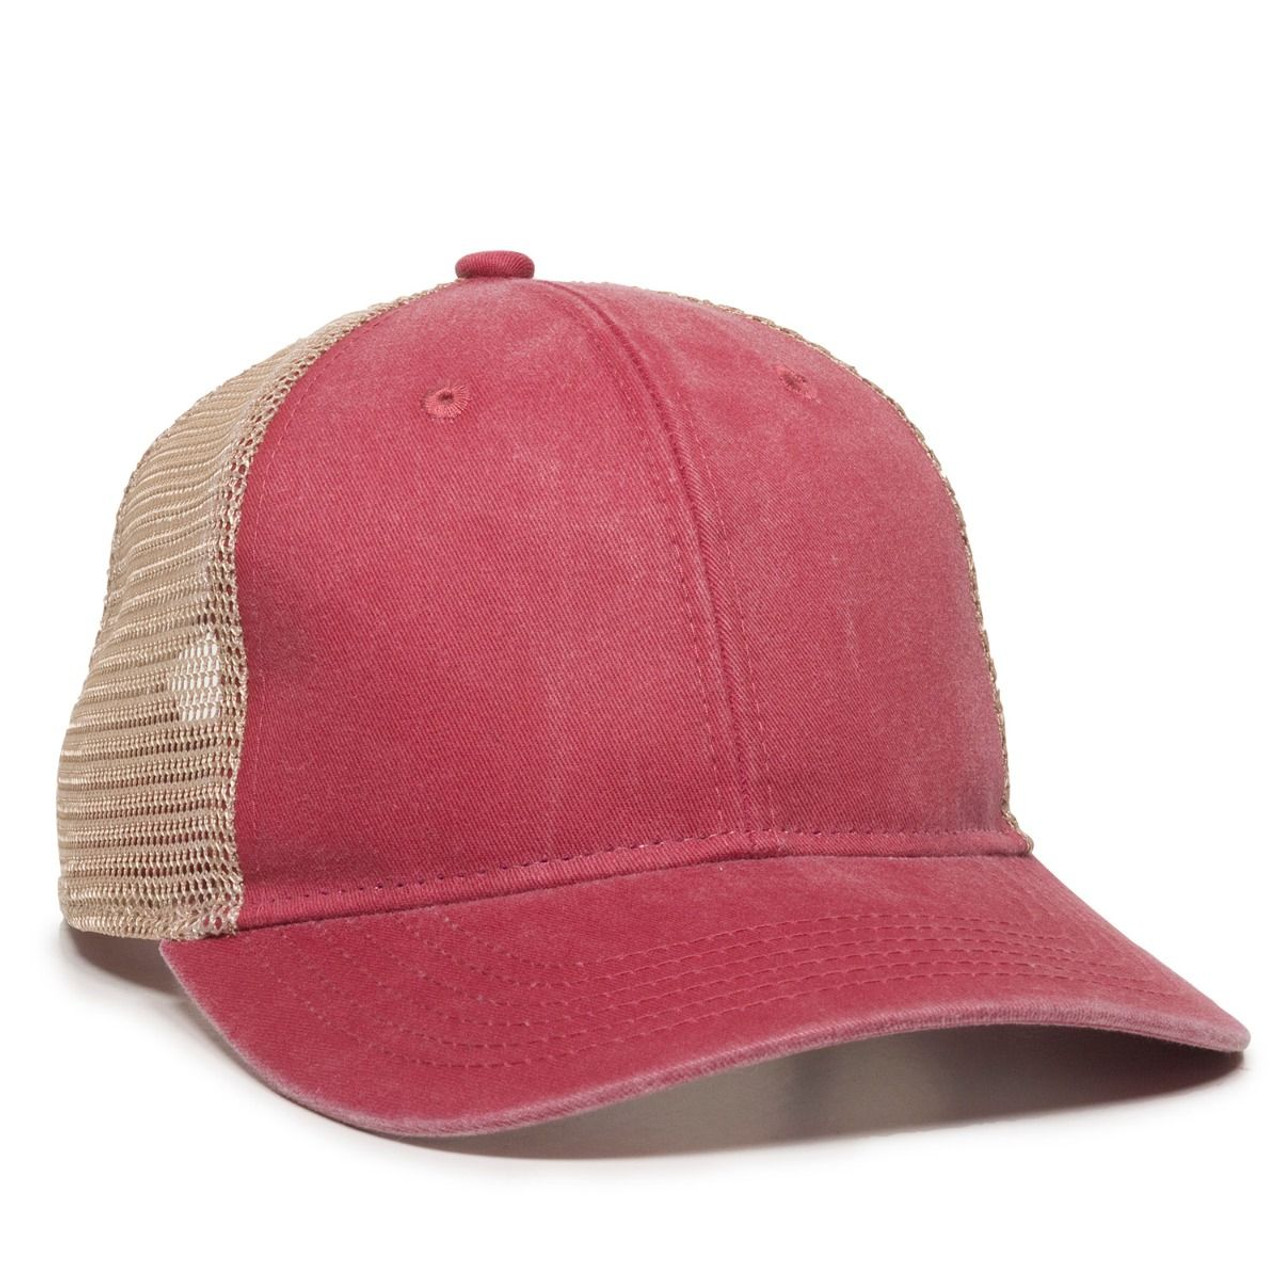 Ponytail Mesh-Back Cap - PNY100M Red/ Tea Stain